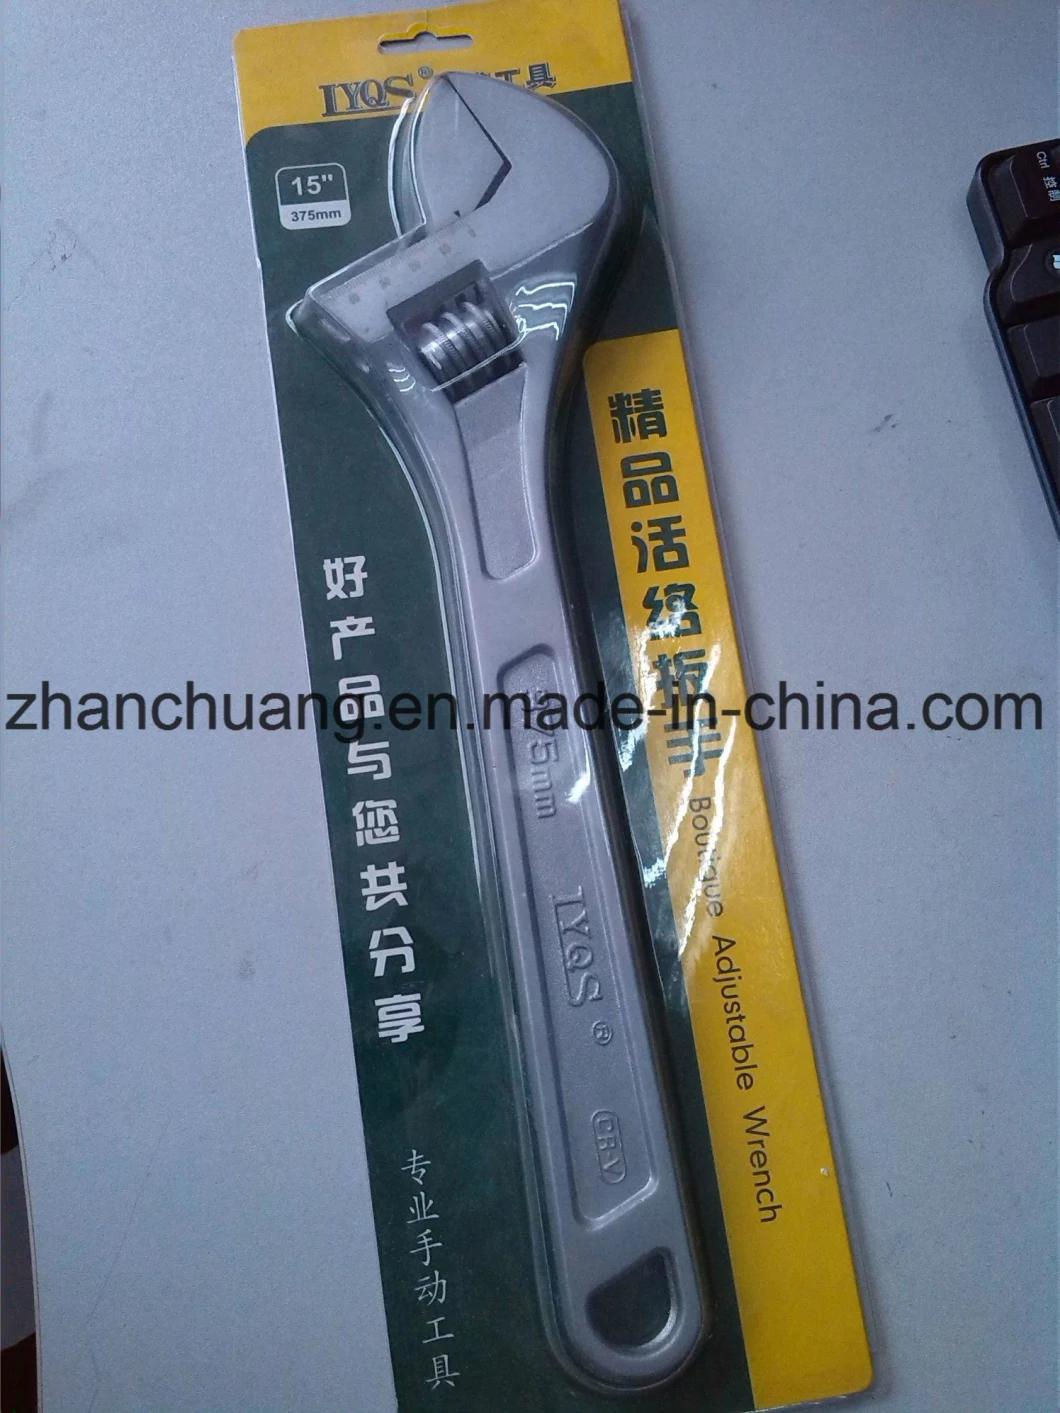 8" High Quality Carbon Steel Chrome Plated Adjustable Wrench/Spanner